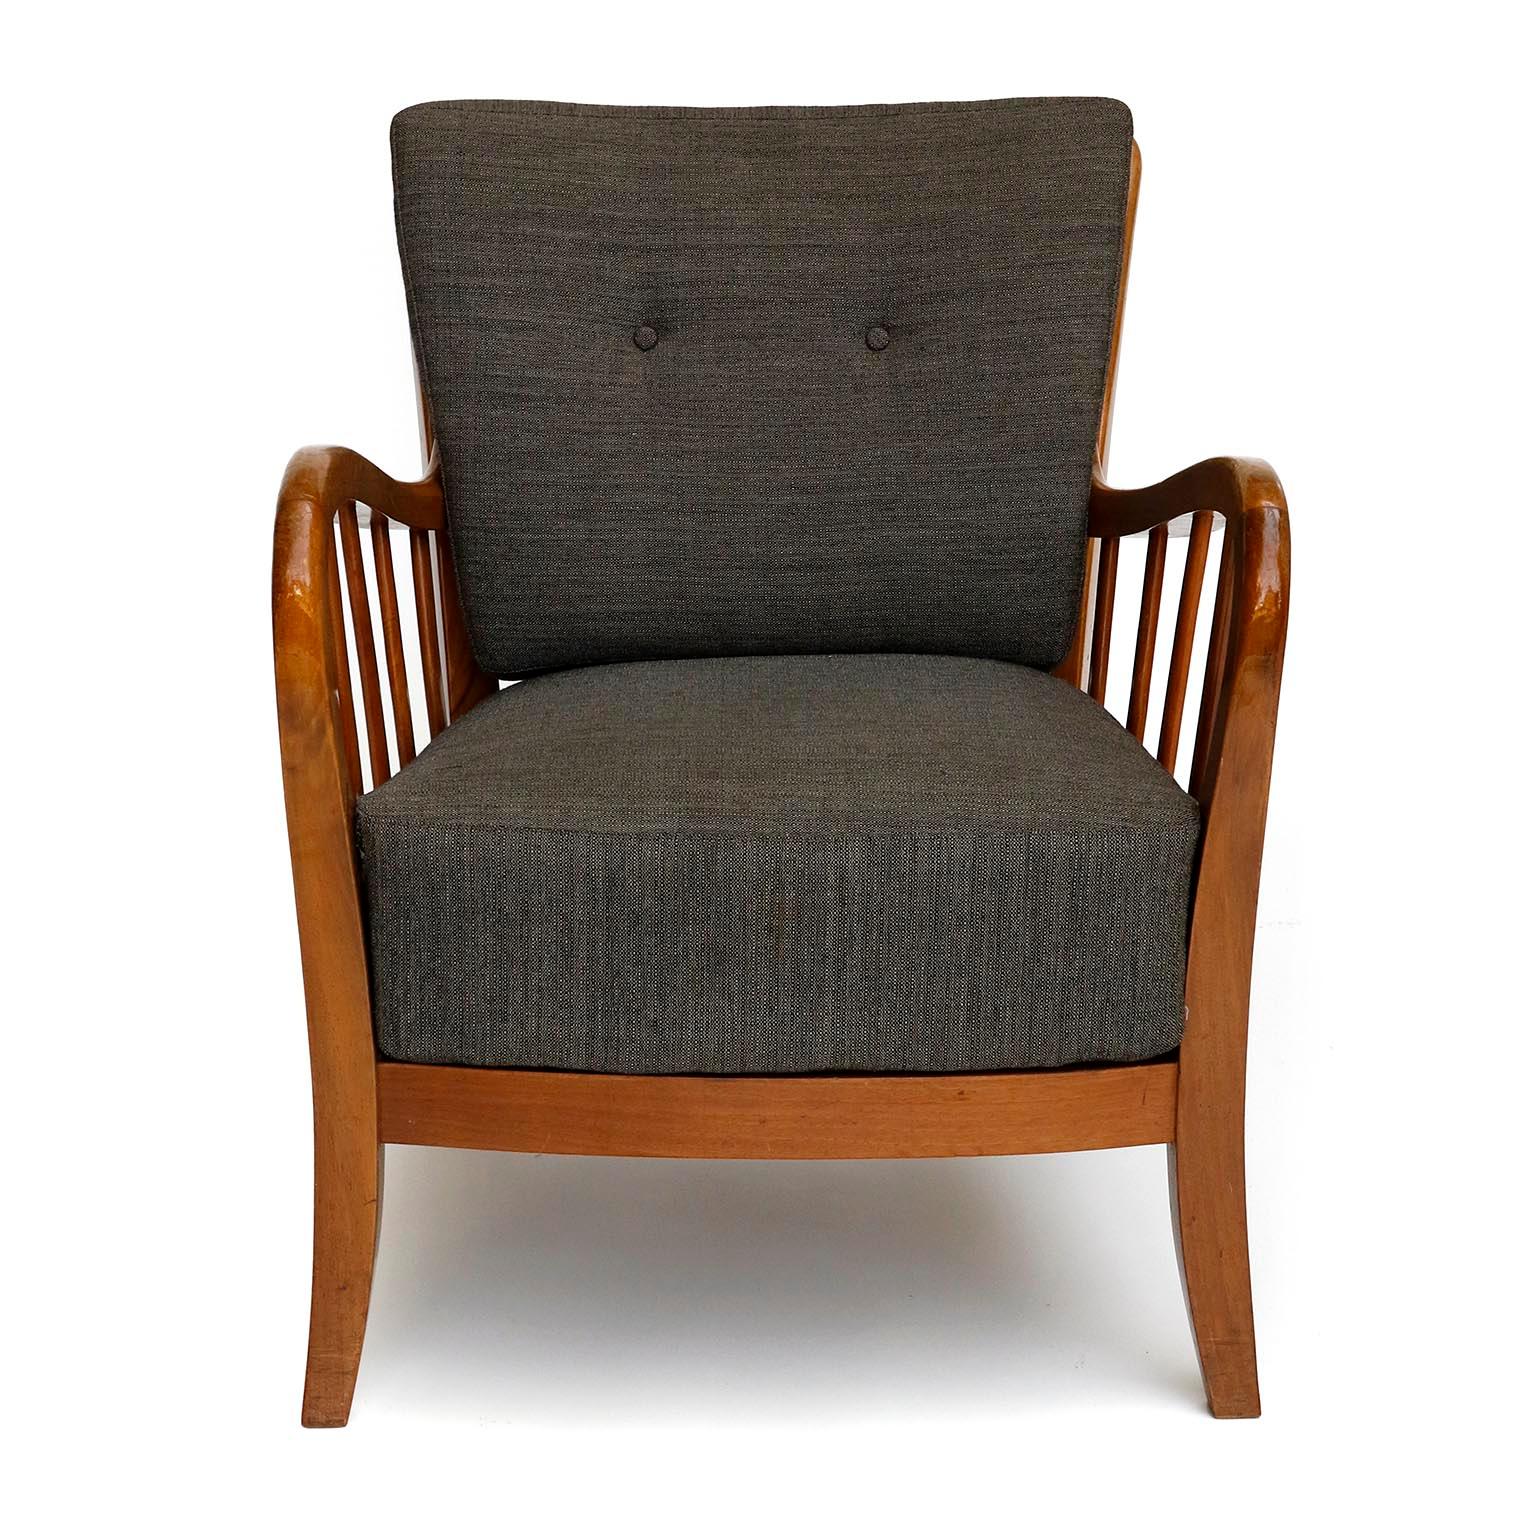 An arm lounge chair manufactured by Thonet, Vienna, Austria, circa 1940 ( late 1930s or early 1940s).
The design is attributed to Josef Frank. The chairs are labeled with Thonet on the underside.
This large, comfortable, handmade chair is made of